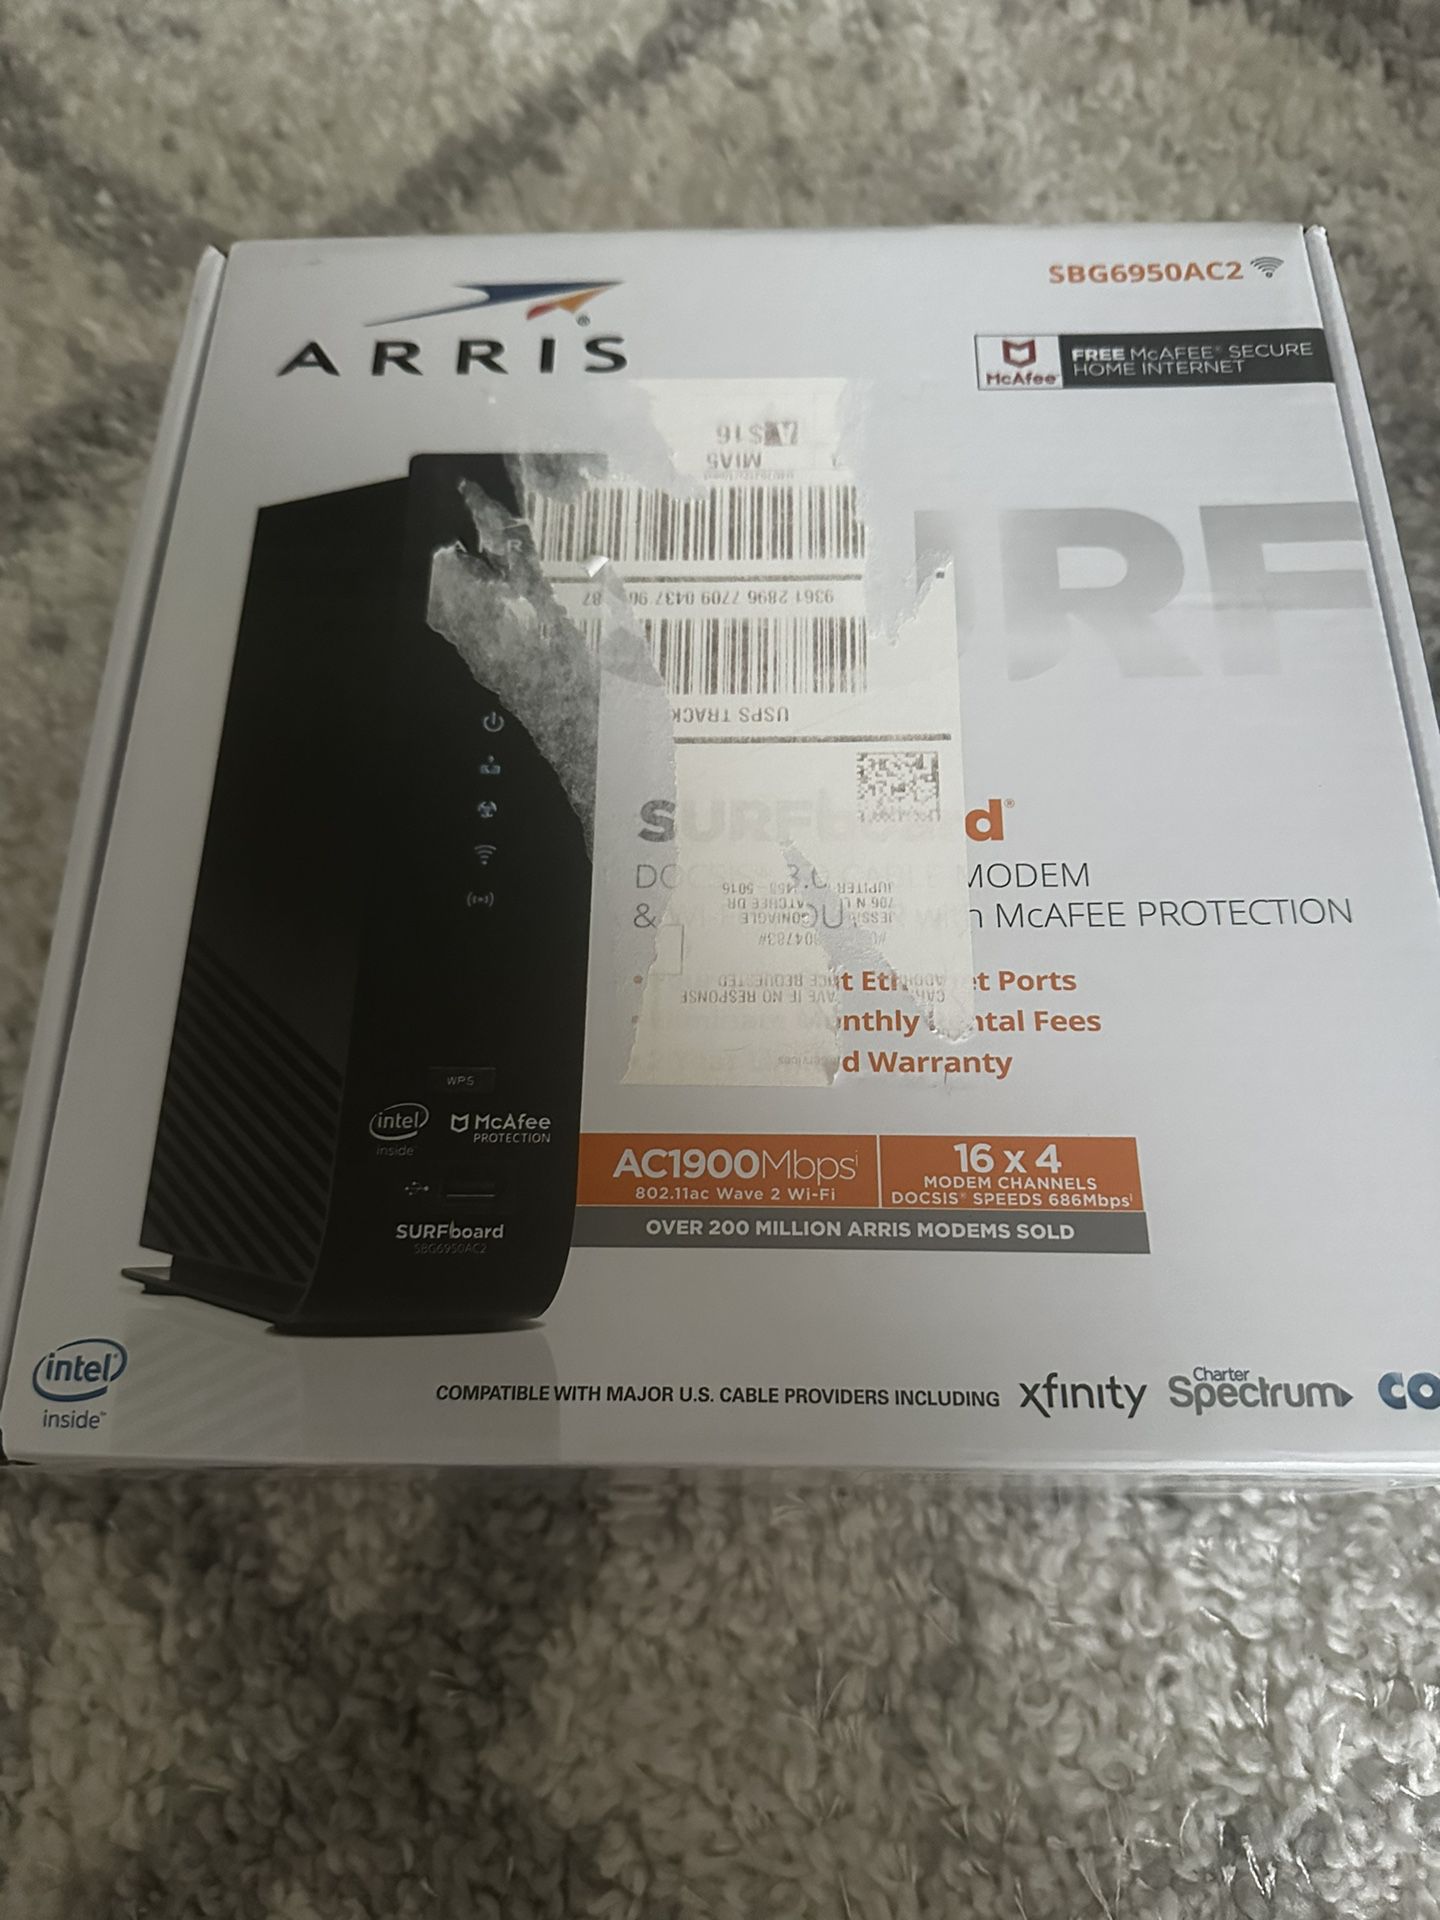 ARRIS Surfboard SBG6950AC2 DOCSIS 3.0 Cable Modem & AC1900 Wi-Fi Router